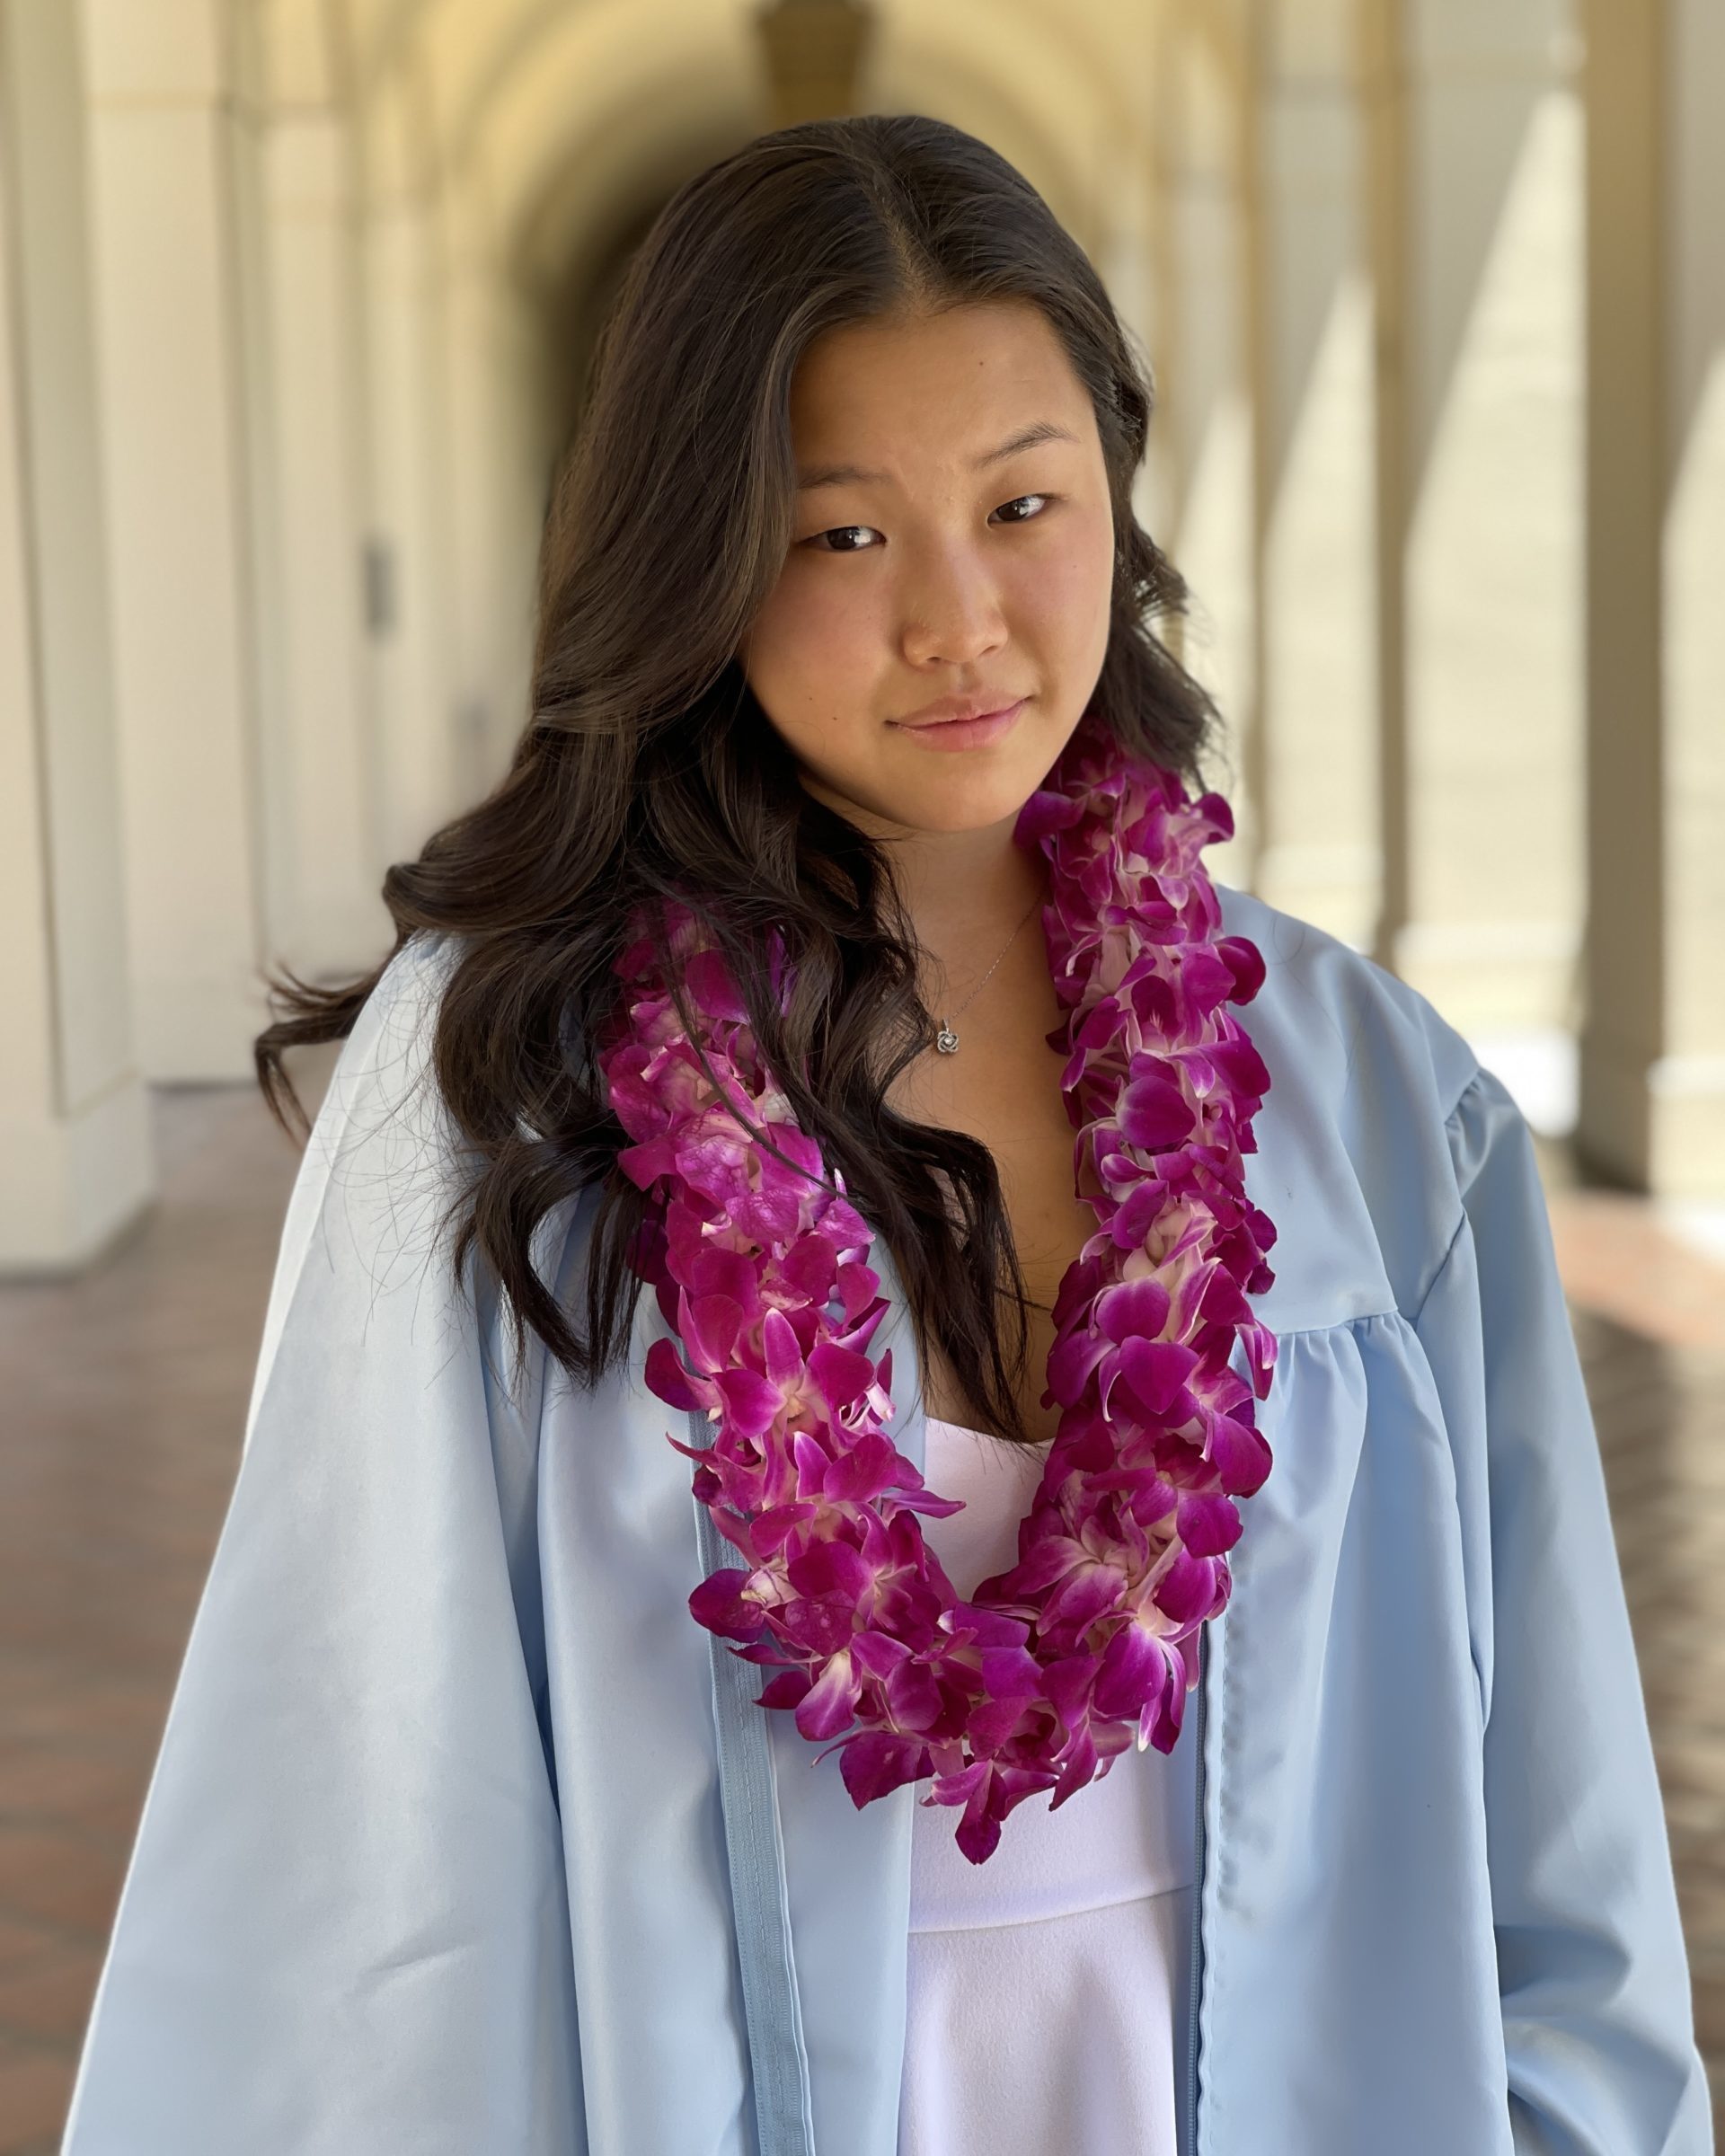 girl wearing light blue graduation gown and purple lei